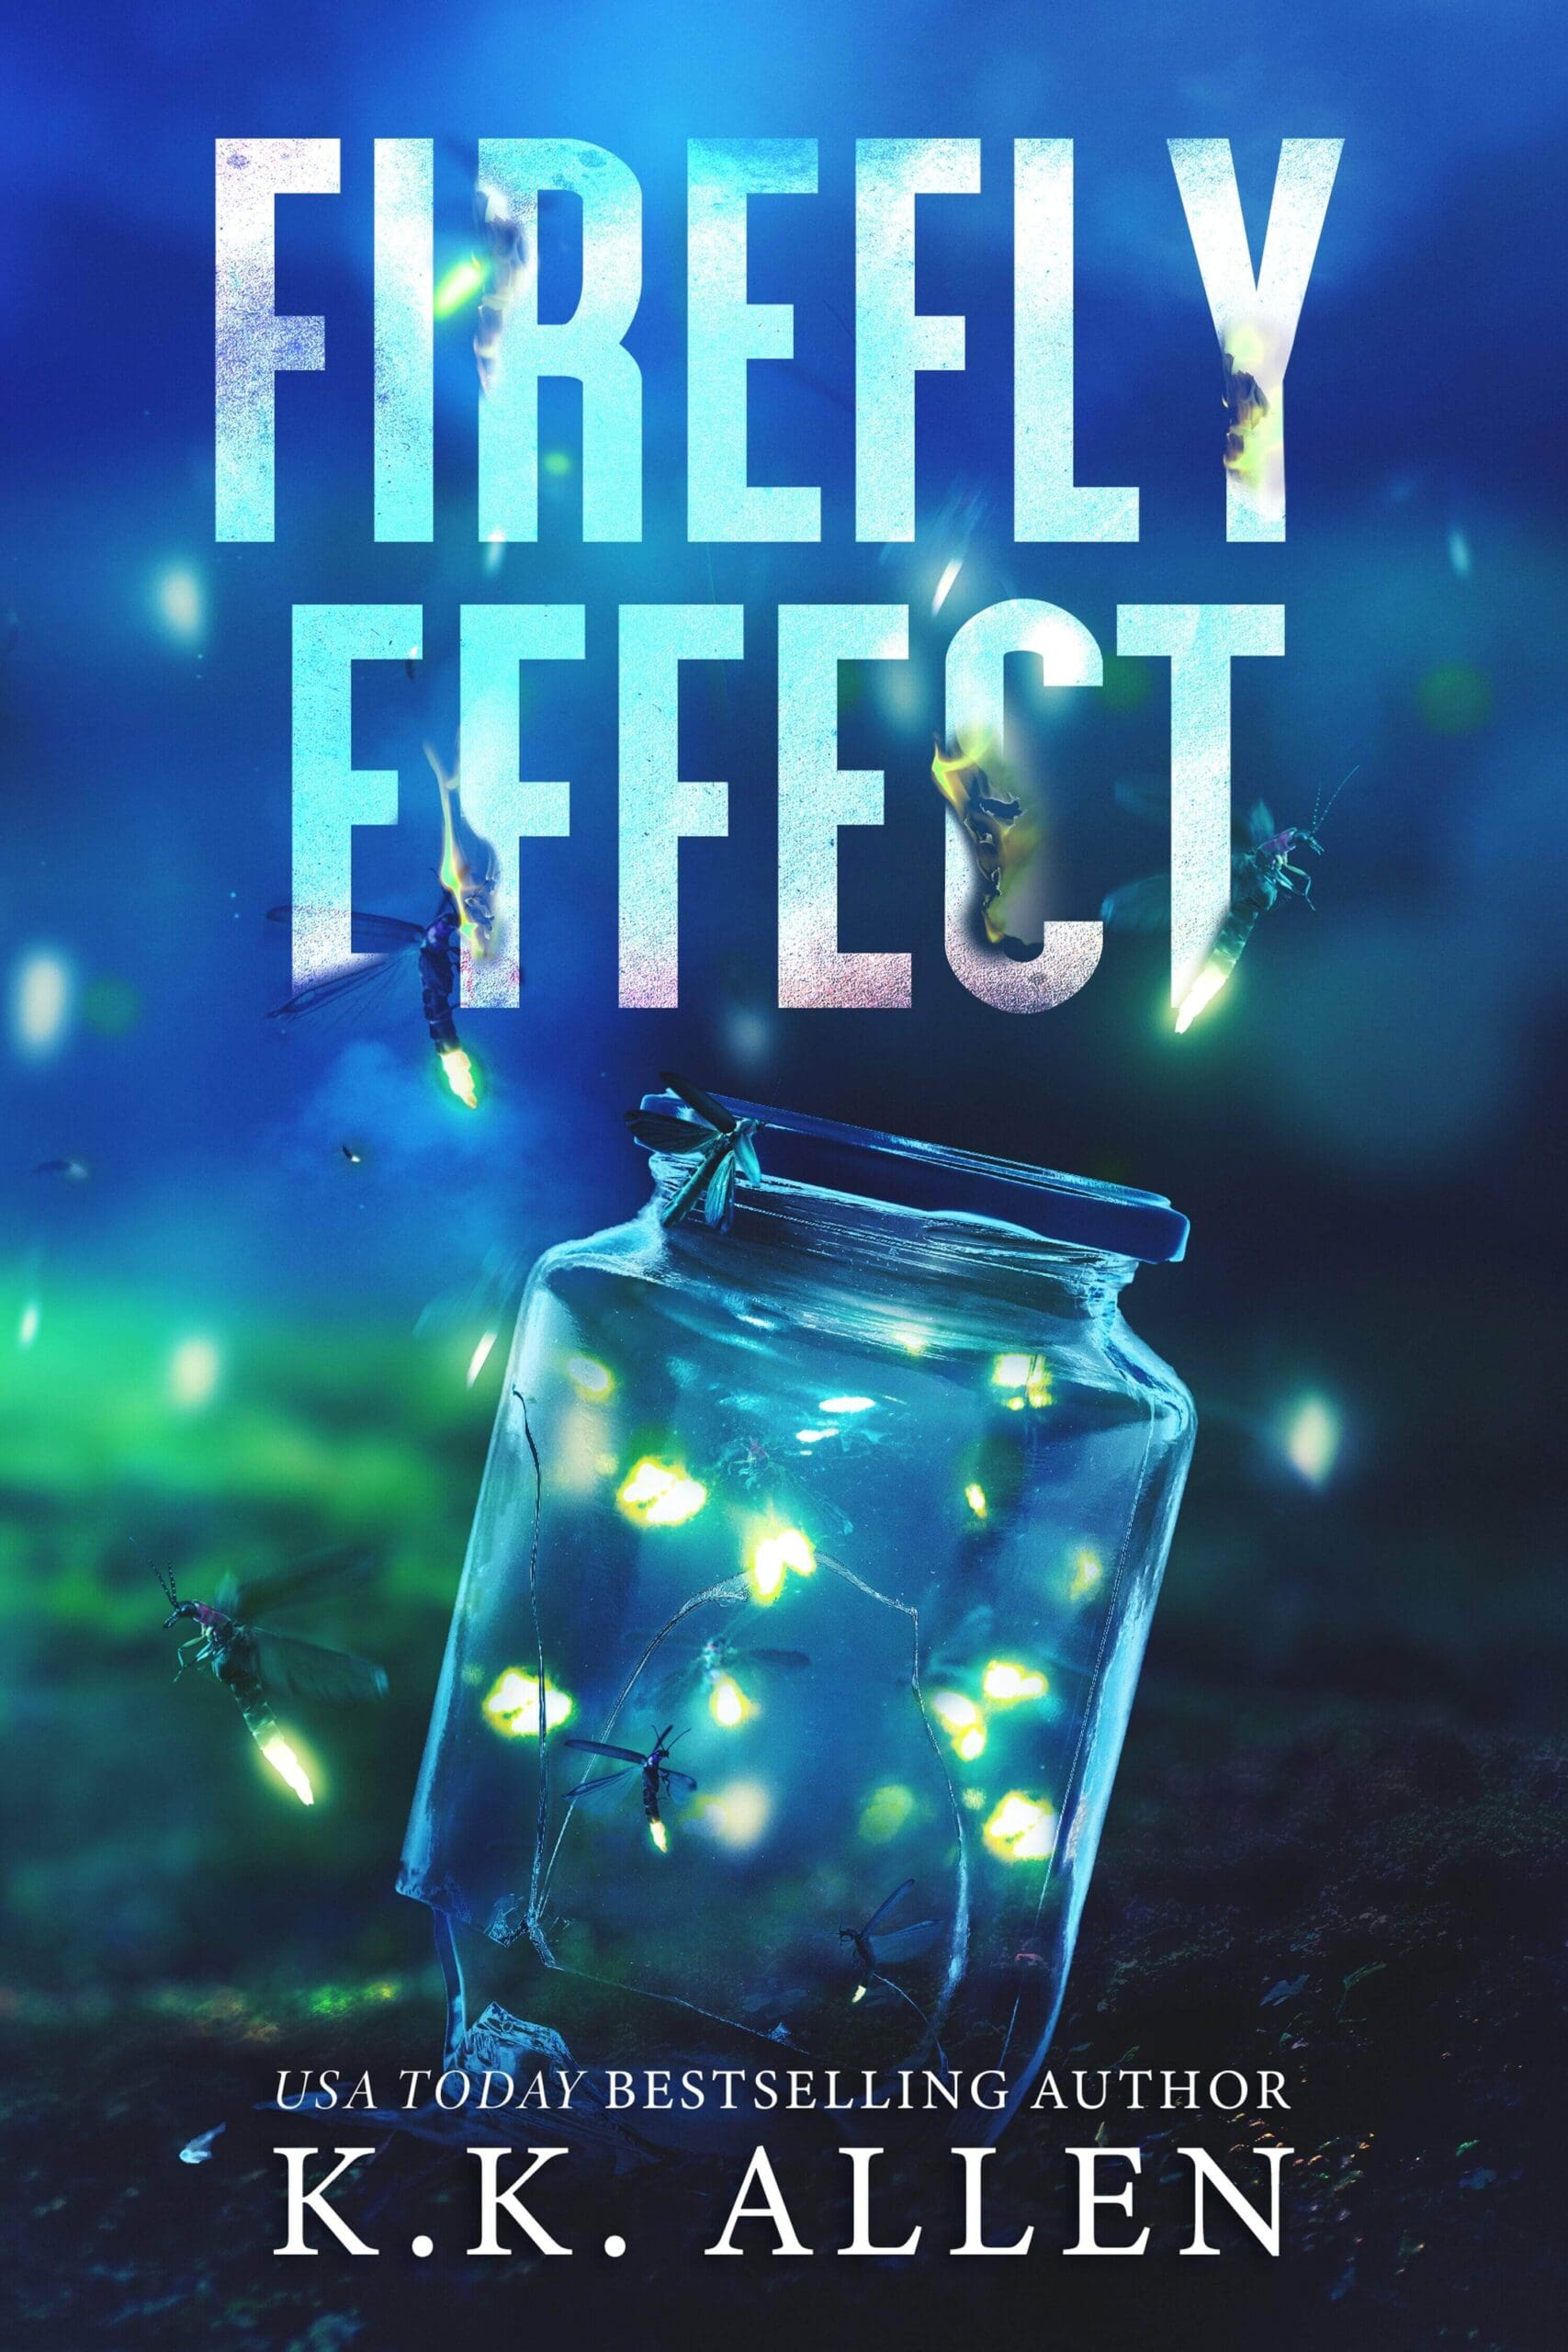 Blue and green book cover for Firefly Effect by K.K. Allen with a jar of fireflies lighting up and flying out of the jar sitting on grass